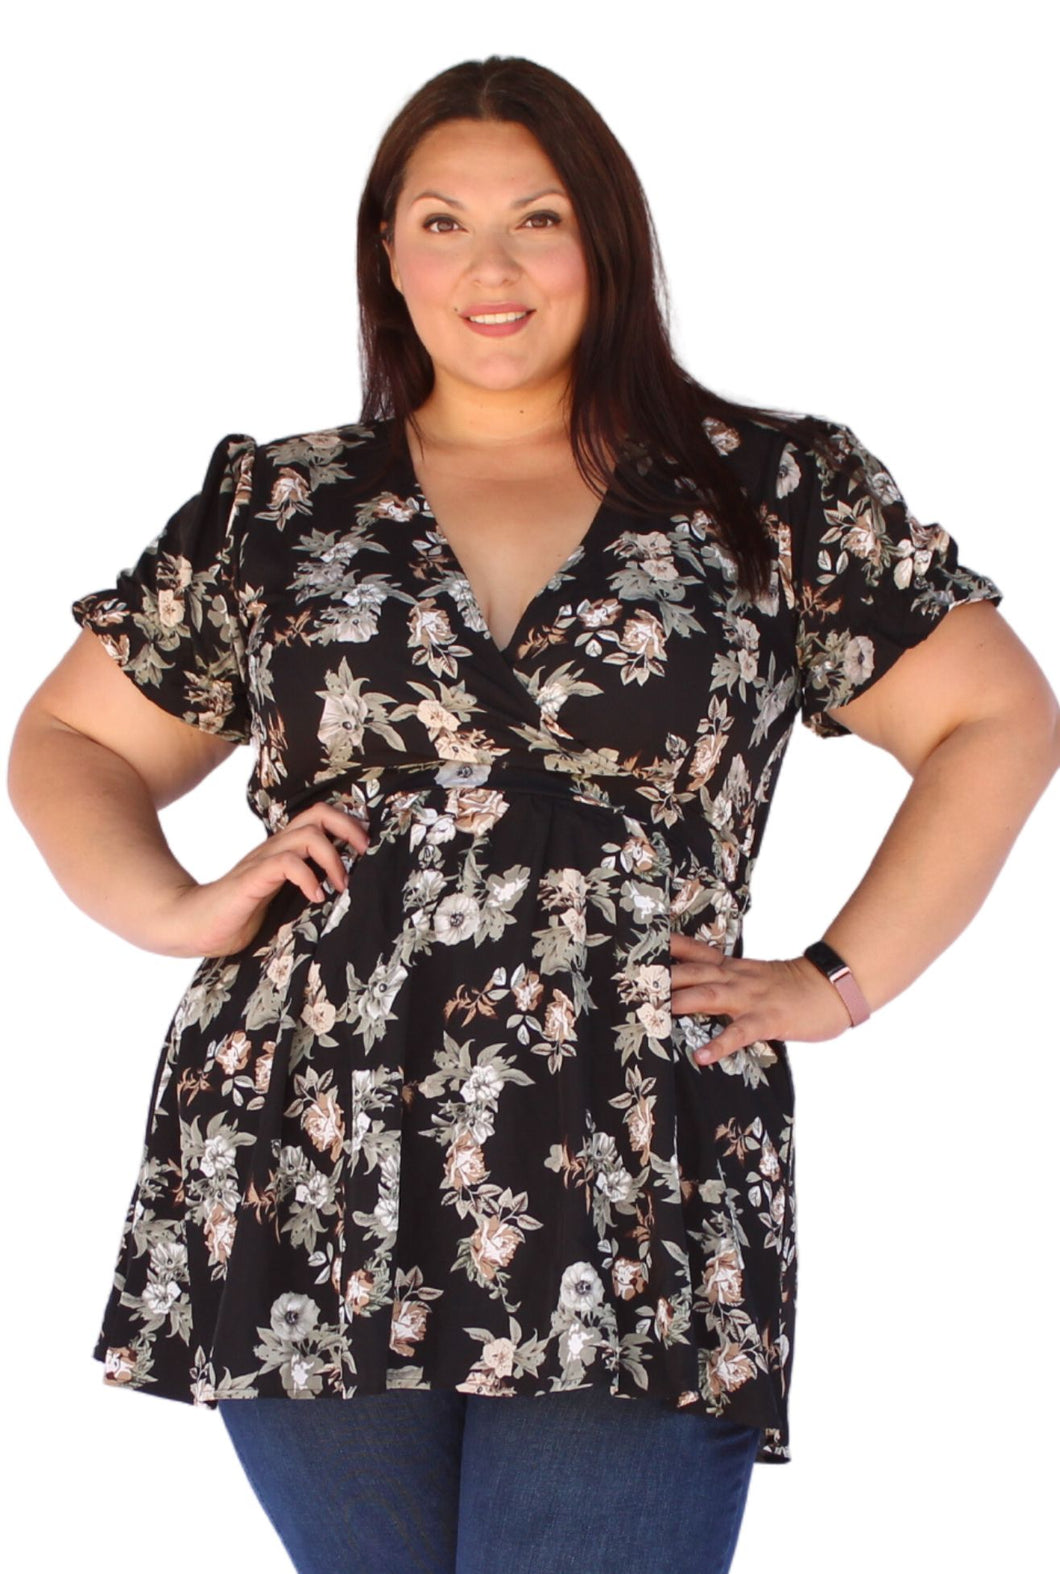 Bloomchic Black, White, and Cream Floral V-Neck Tunic Multiple Sizes